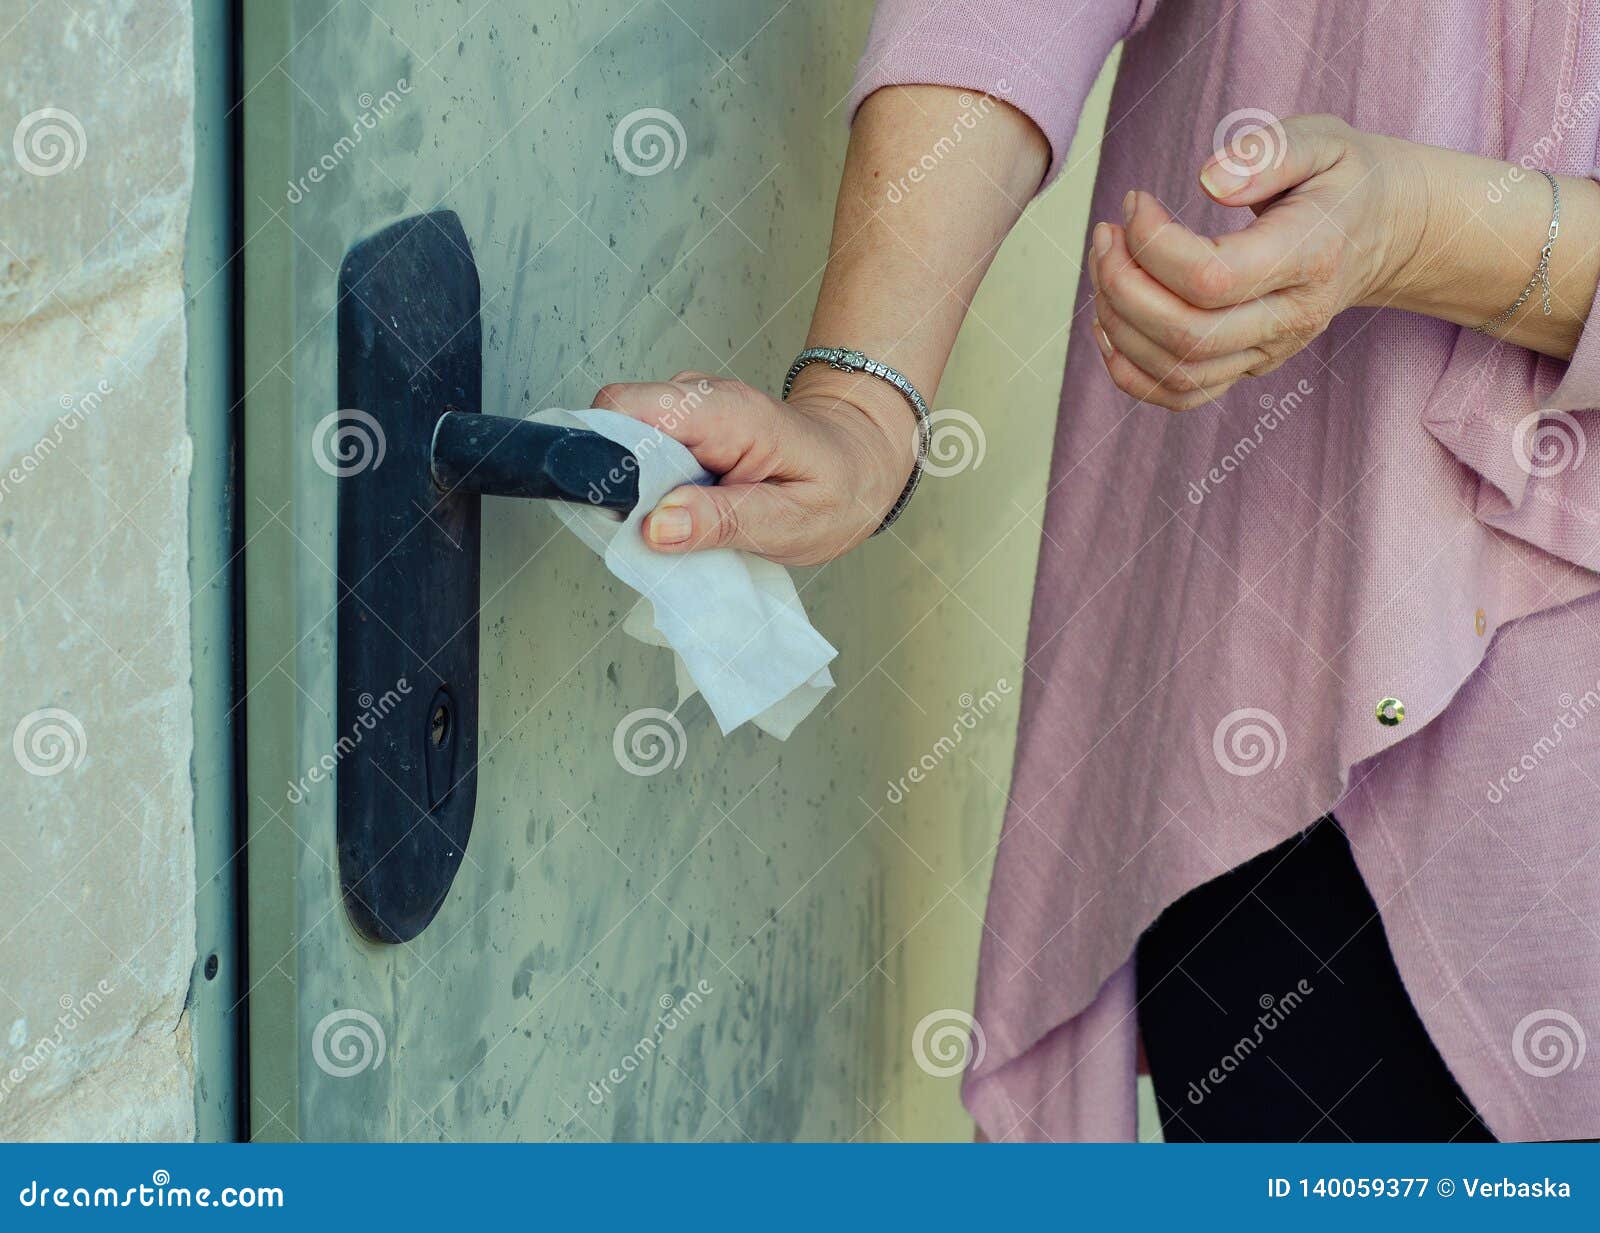 a woman suffering germophobia presses dirty door handle